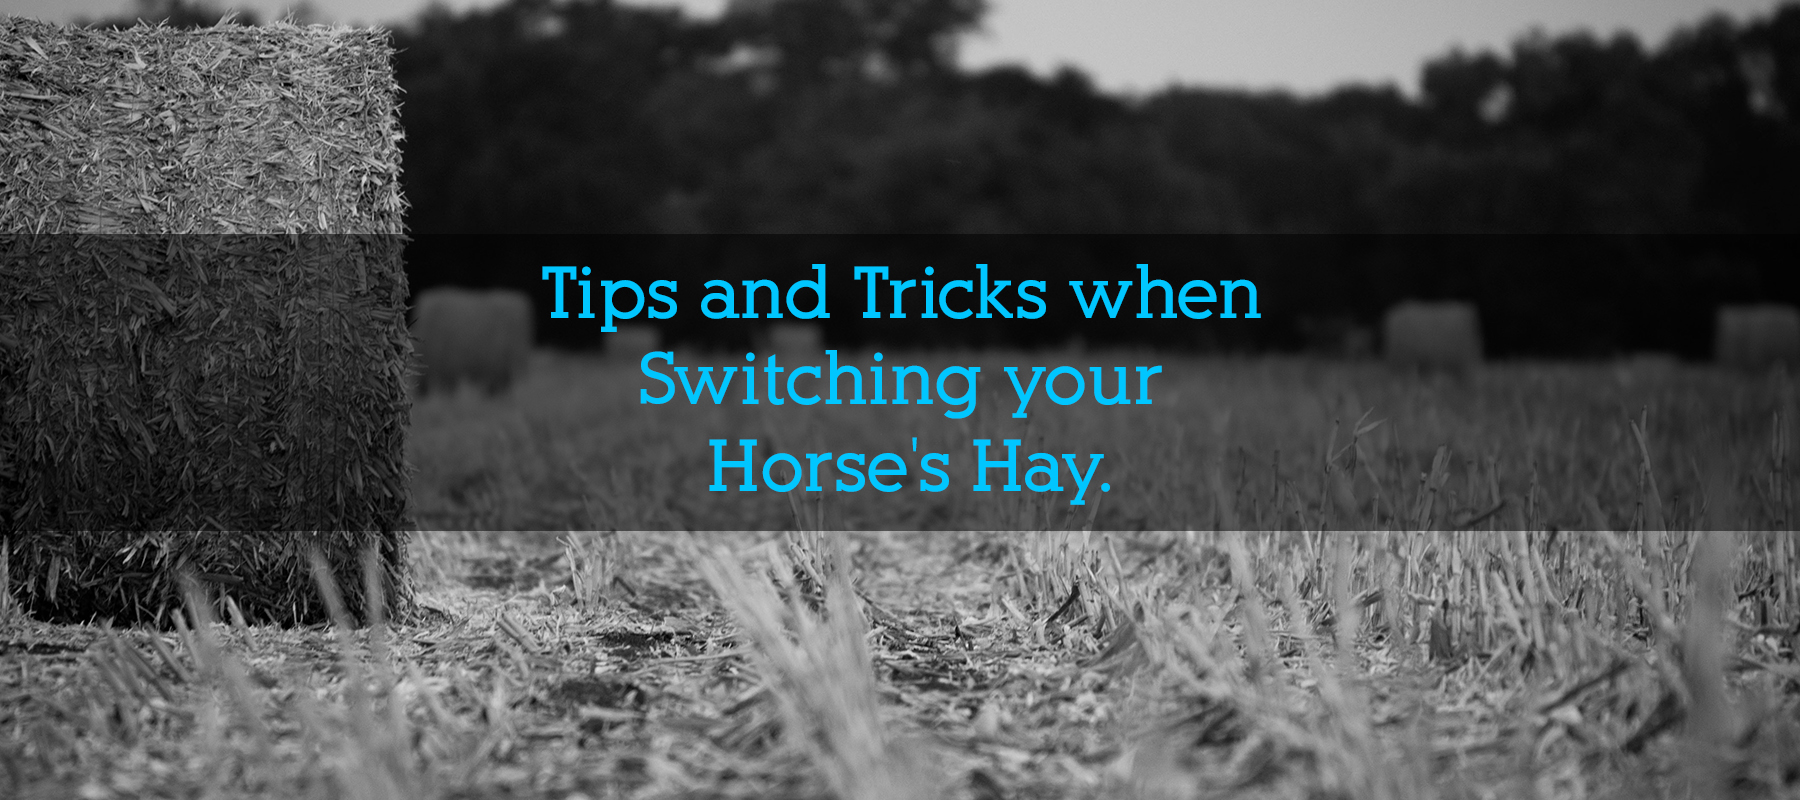 Tips and Tricks when Switching your Horse's Hay.